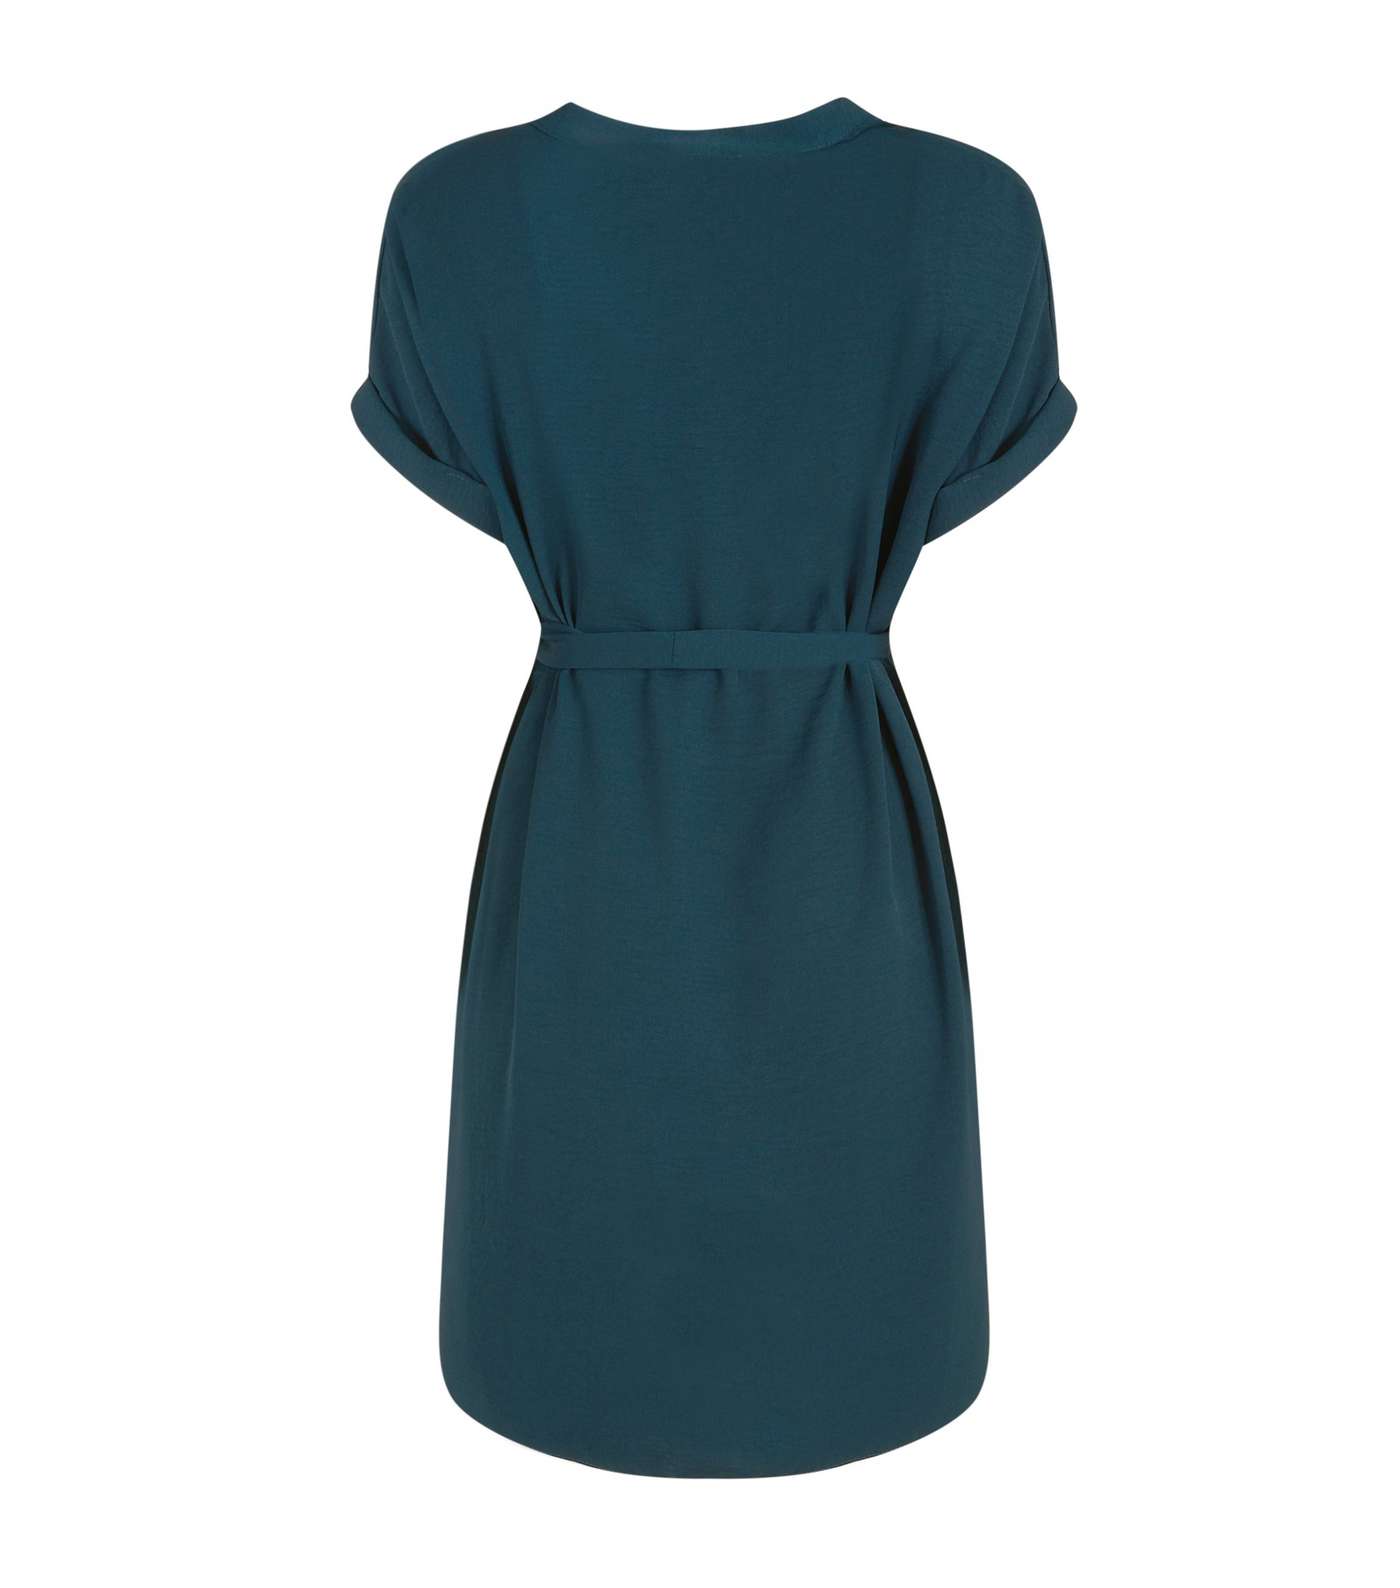 Maternity Teal Belted Tunic Dress Image 2